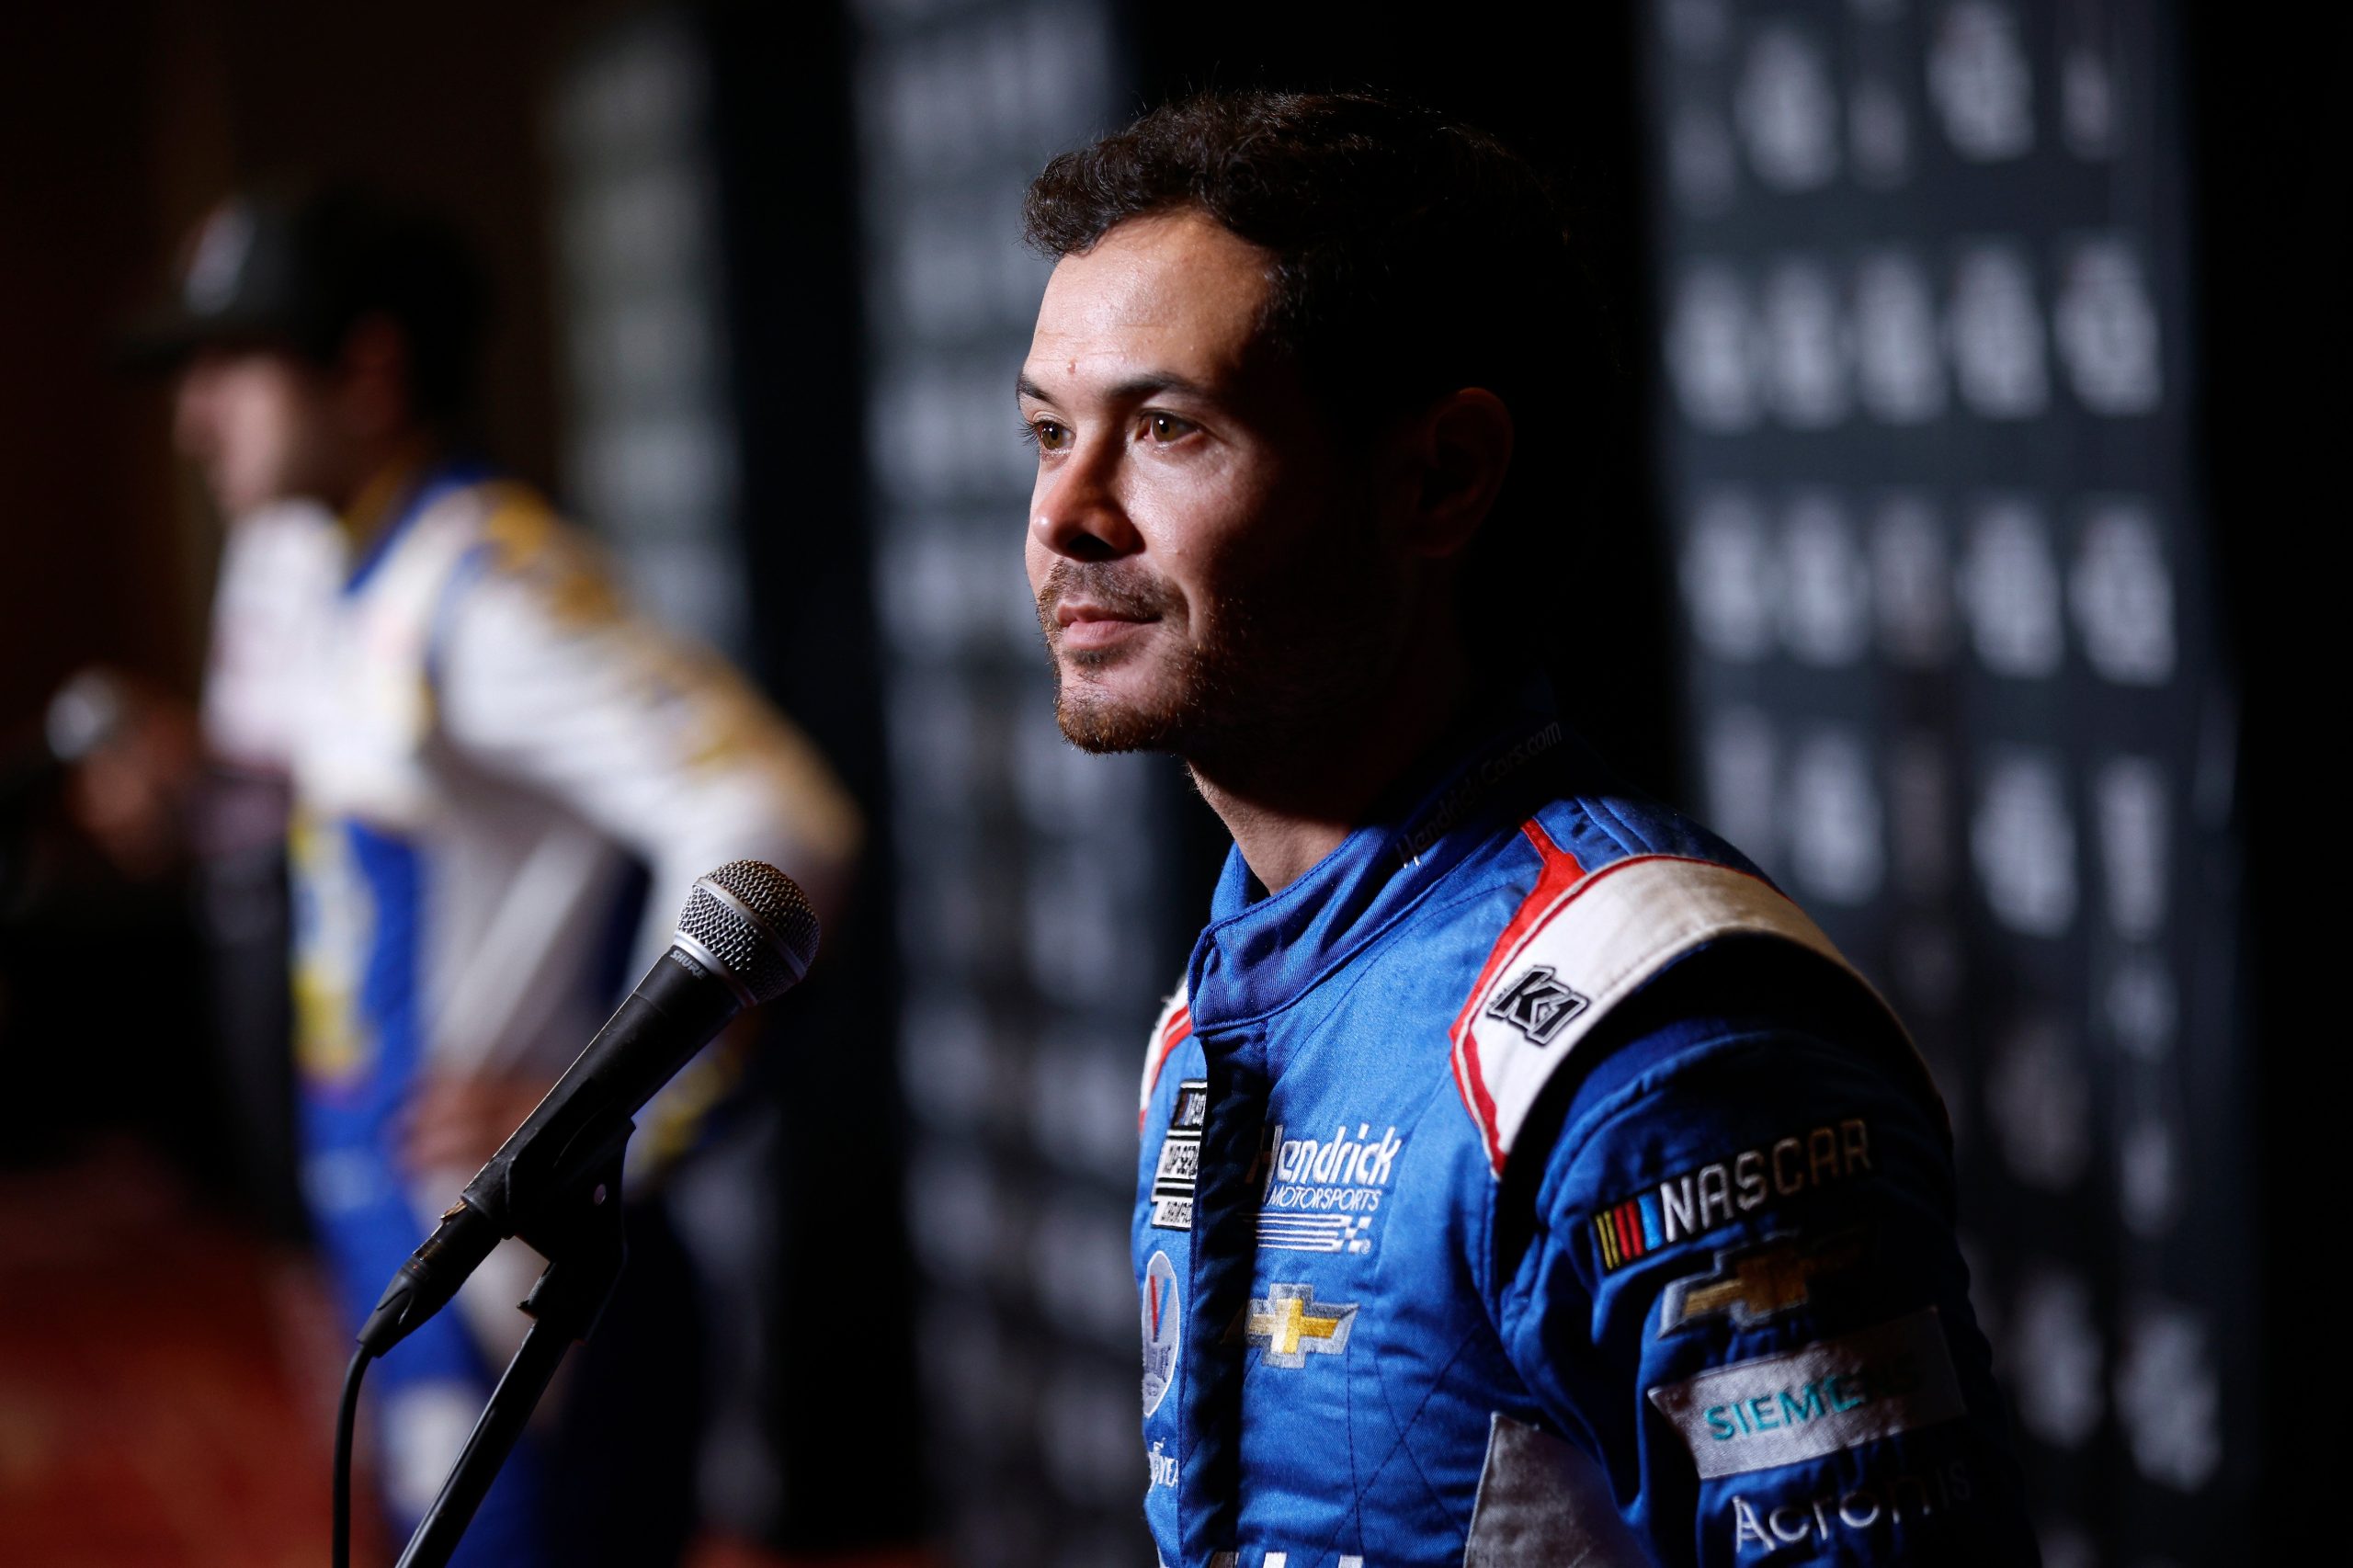 CHARLOTTE, NORTH CAROLINA - SEPTEMBER 01: NASCAR driver Kyle Larson speaks with the media during the NASCAR Cup Series Playoff Media Day at Charlotte Convention Center on September 01, 2022 in Charlotte, North Carolina. (Photo by Jared C. Tilton/Getty Images)